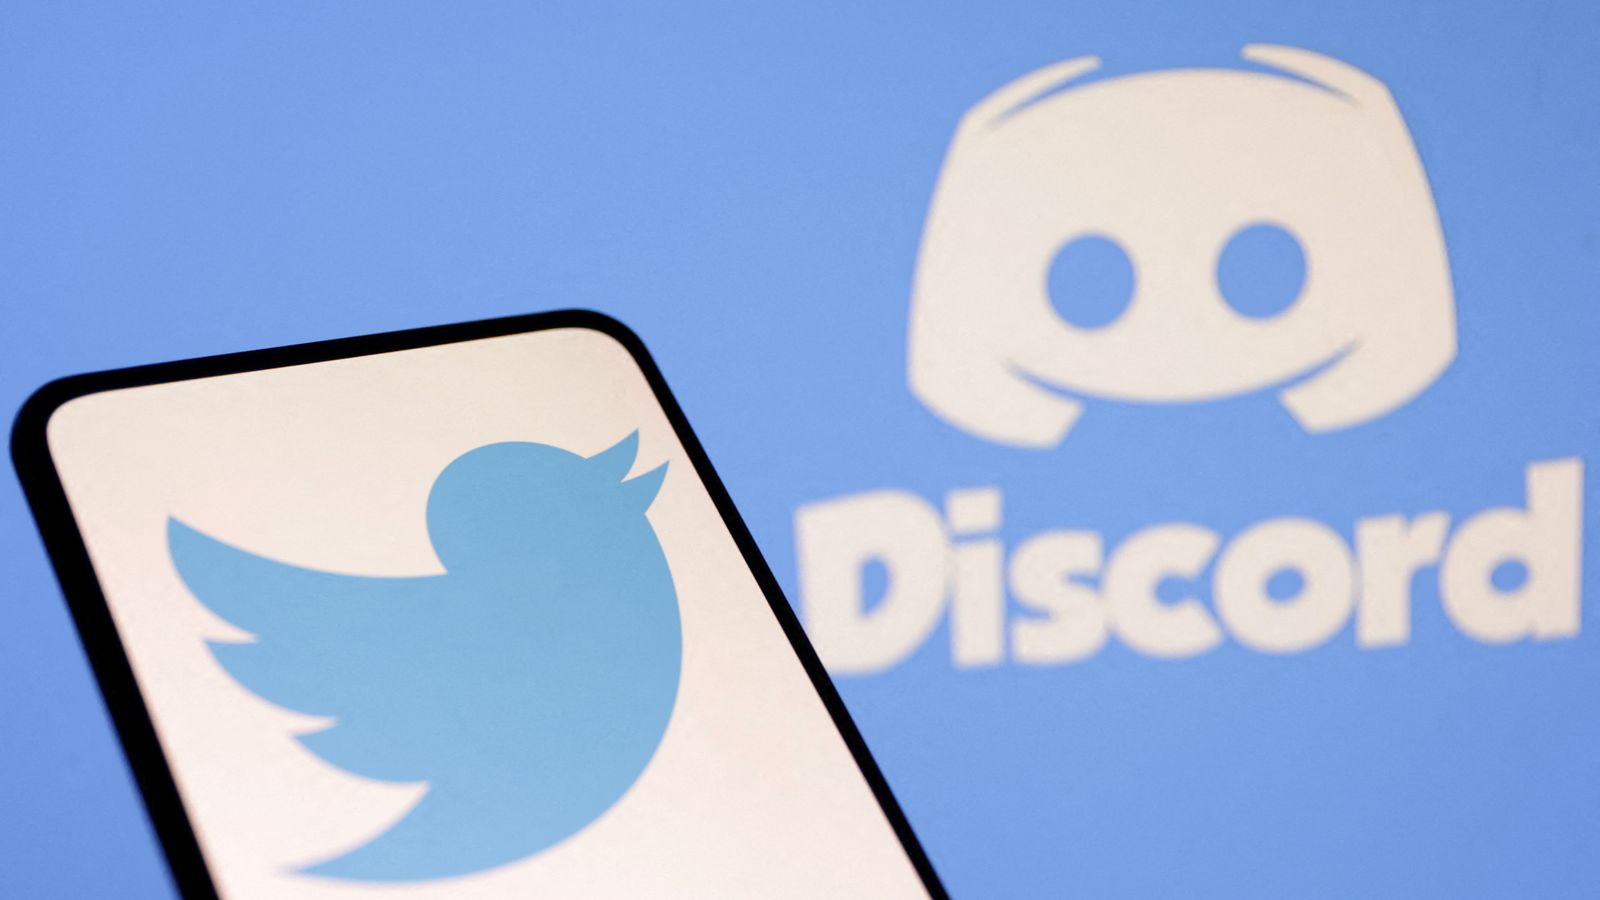 Treasury trolled after opening account on instant messaging social platform Discord